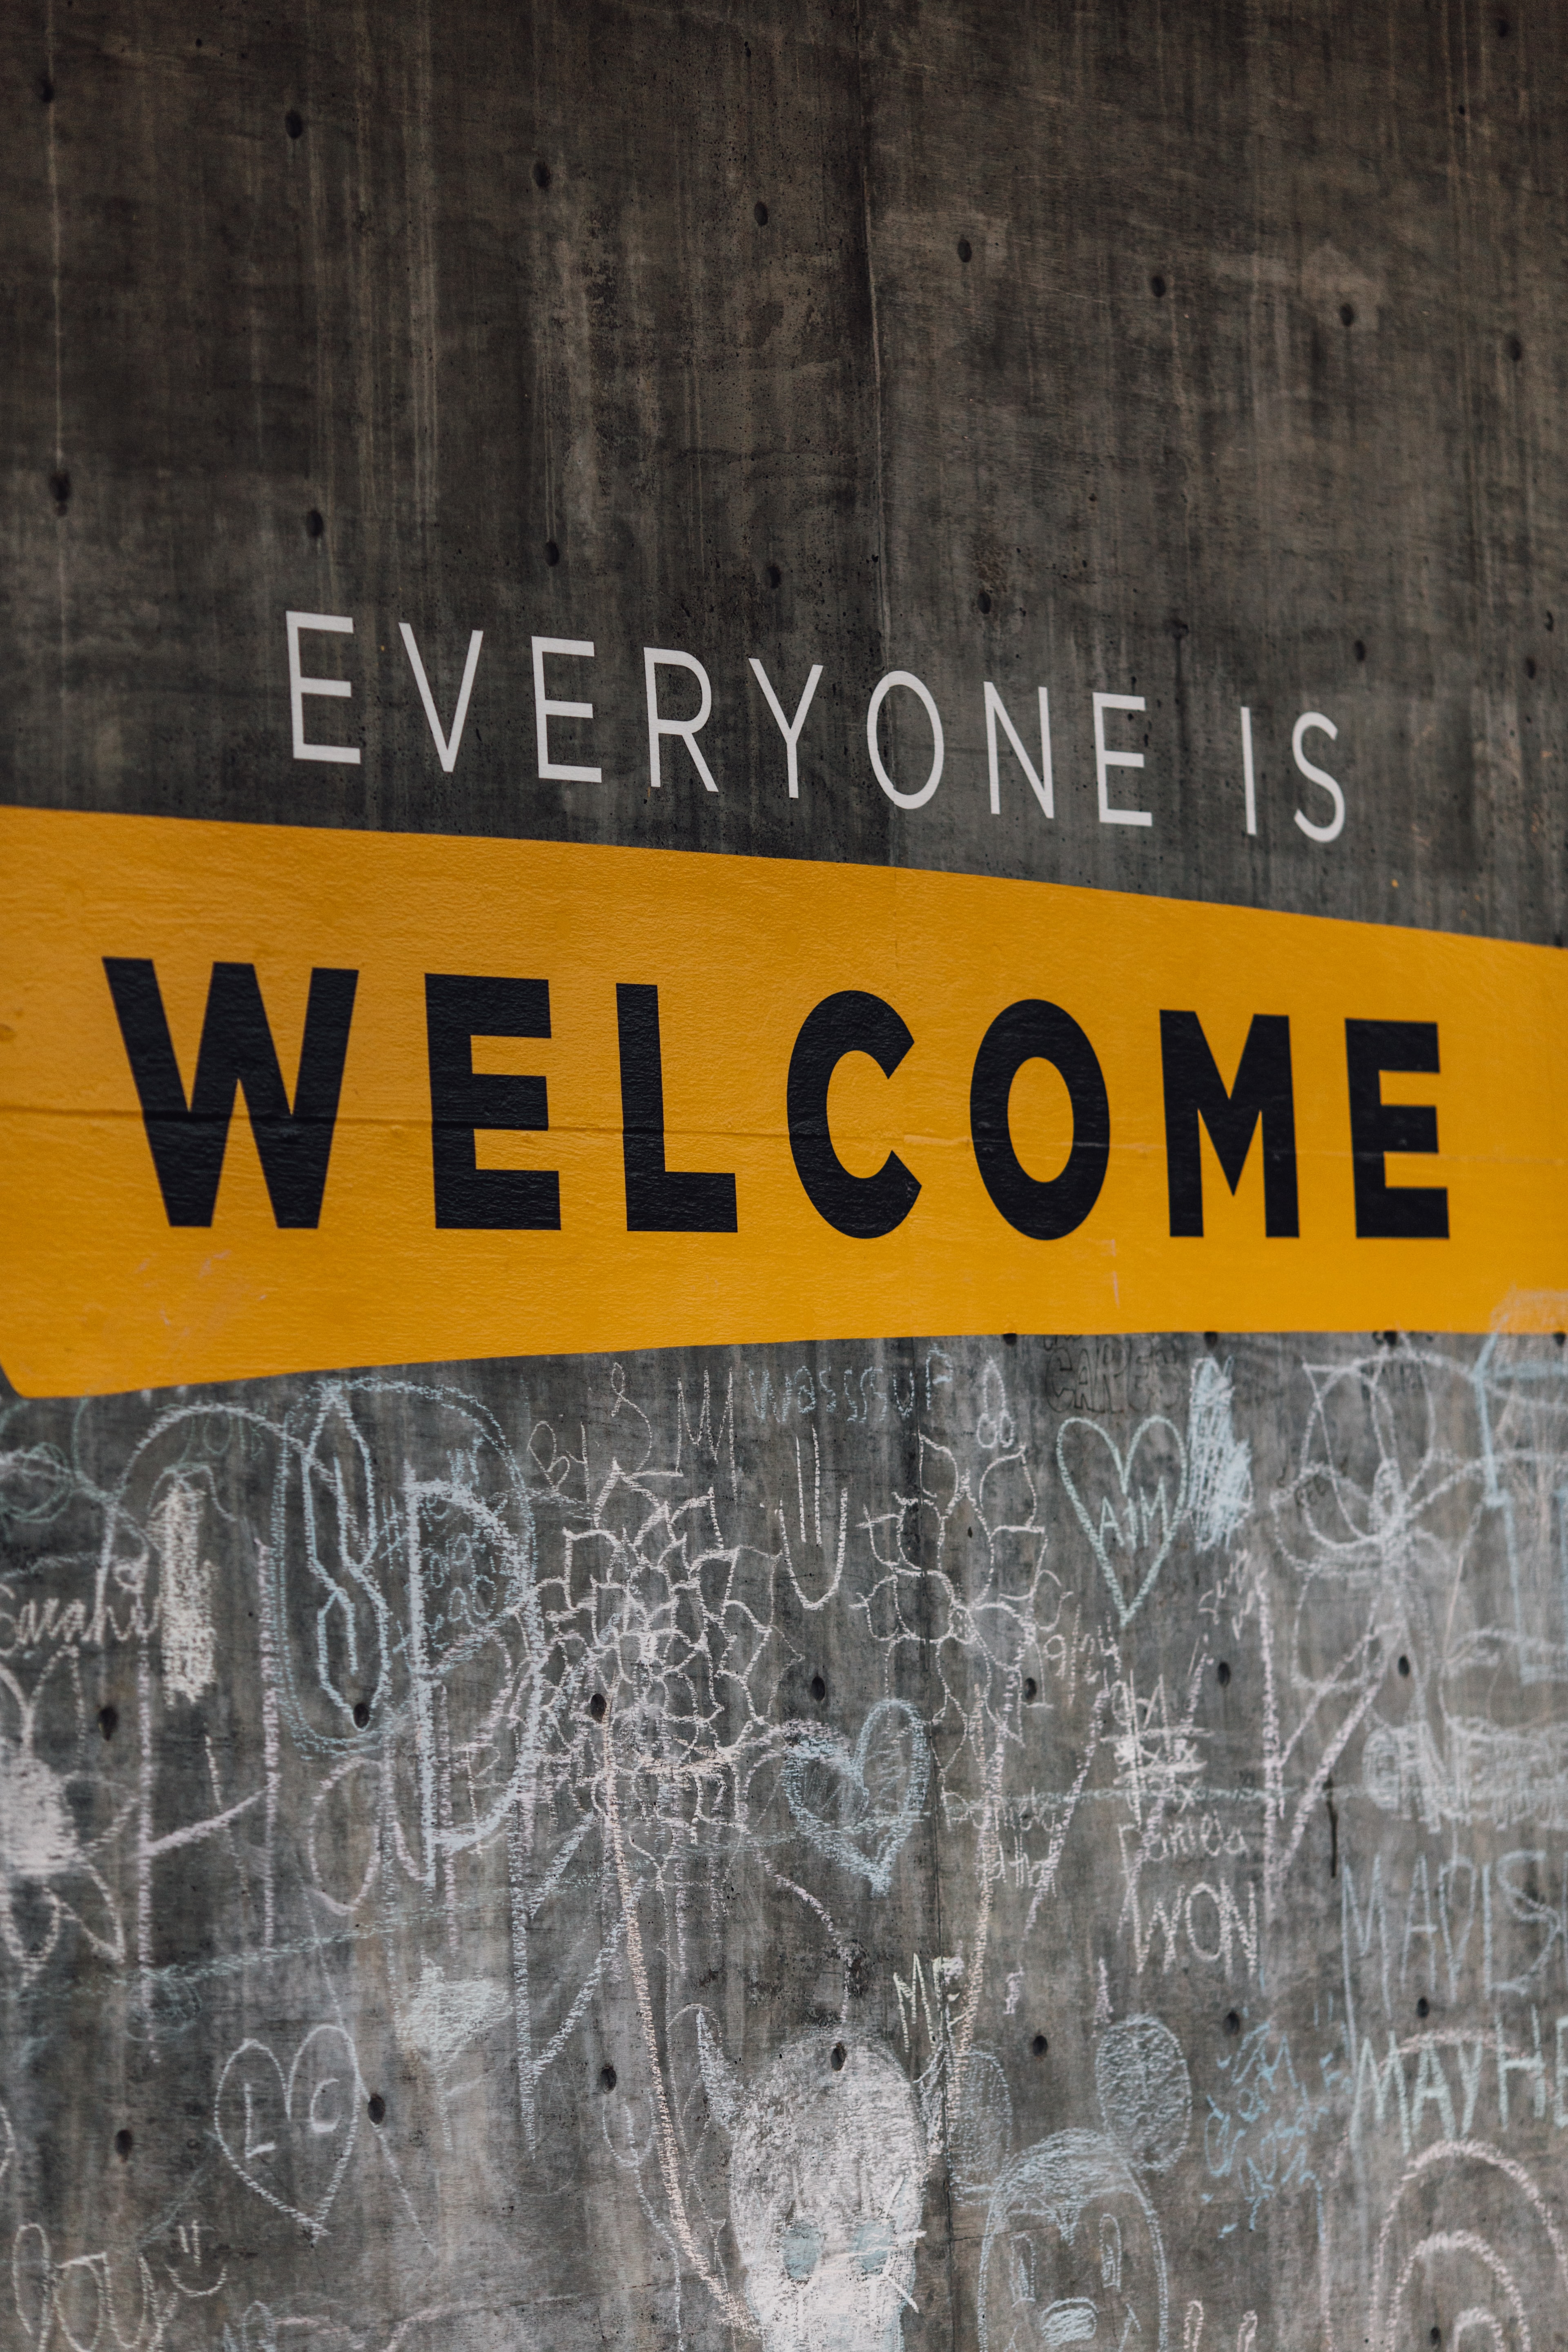 Sign on wooden wall reading “Everyone is welcome,” and chalk graffiti under sign